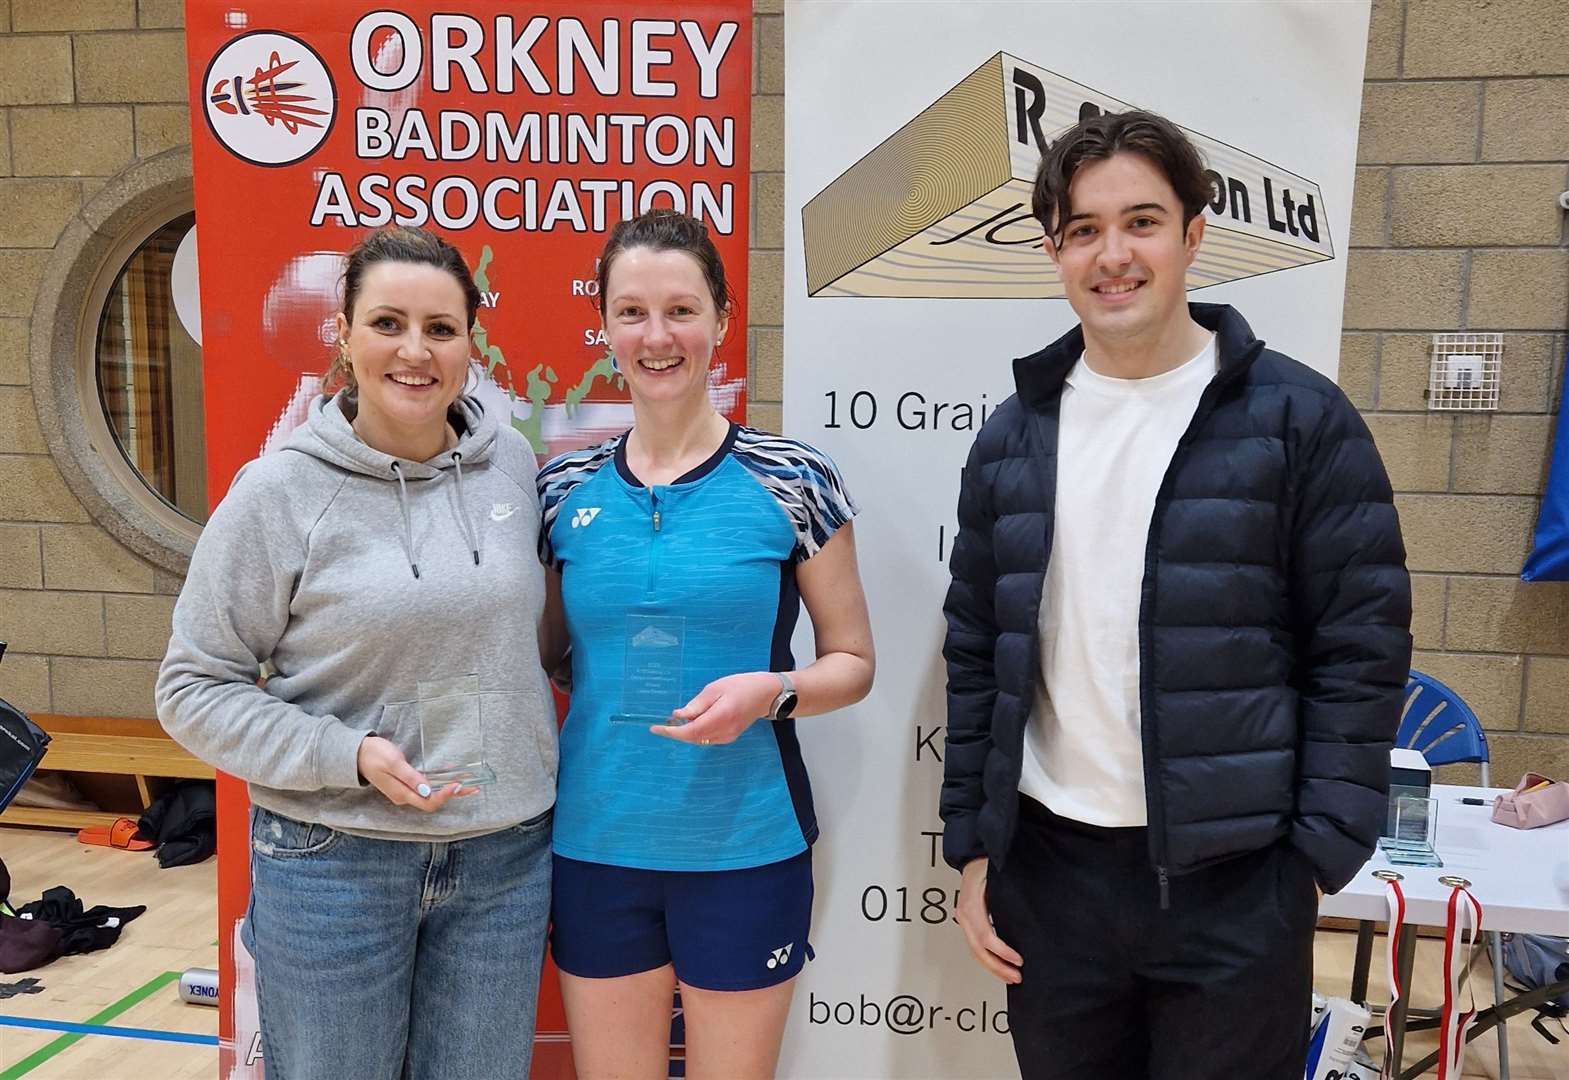 Two doubles titles for Caithness players in Orkney badminton championships